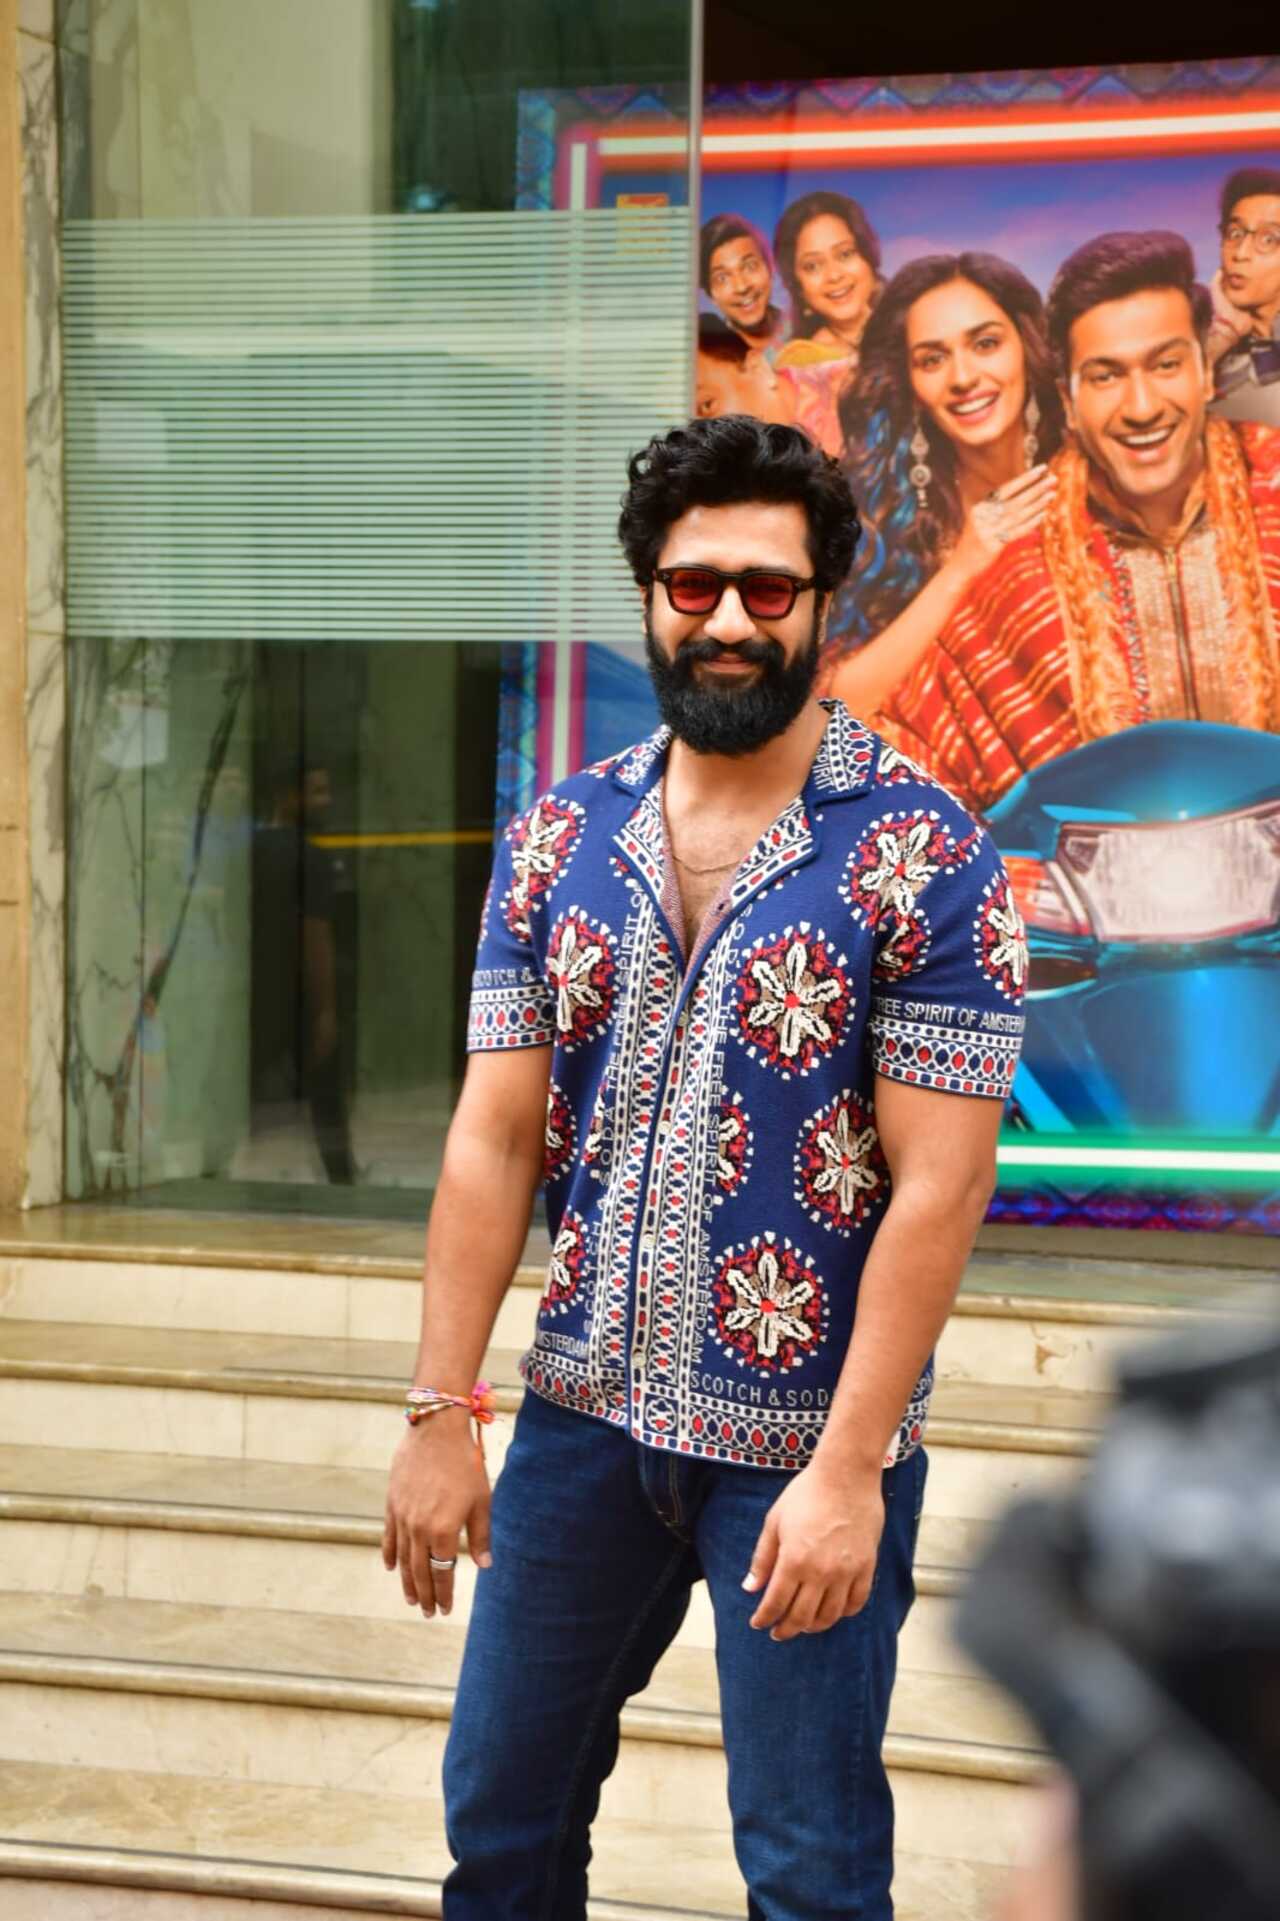 The actor was seen at Yash Raj Films Studio in Mumbai for the launch. He wore a printed shirt and jeans